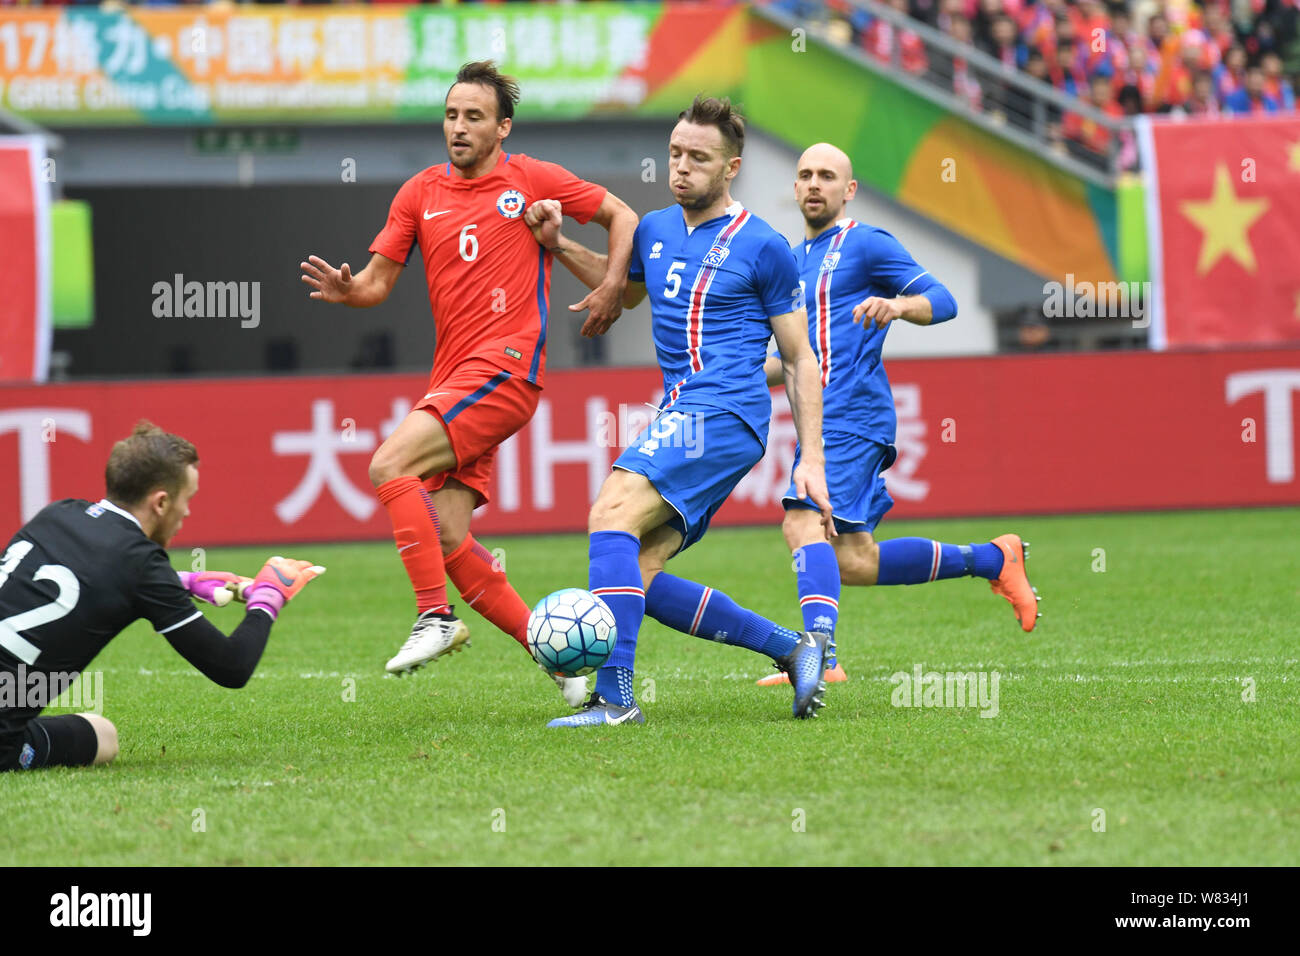 Jose Pedro Fuenzalida of Chile, second left, challenges players of Iceland in their final match during the 2017 Gree China Cup International Football Stock Photo